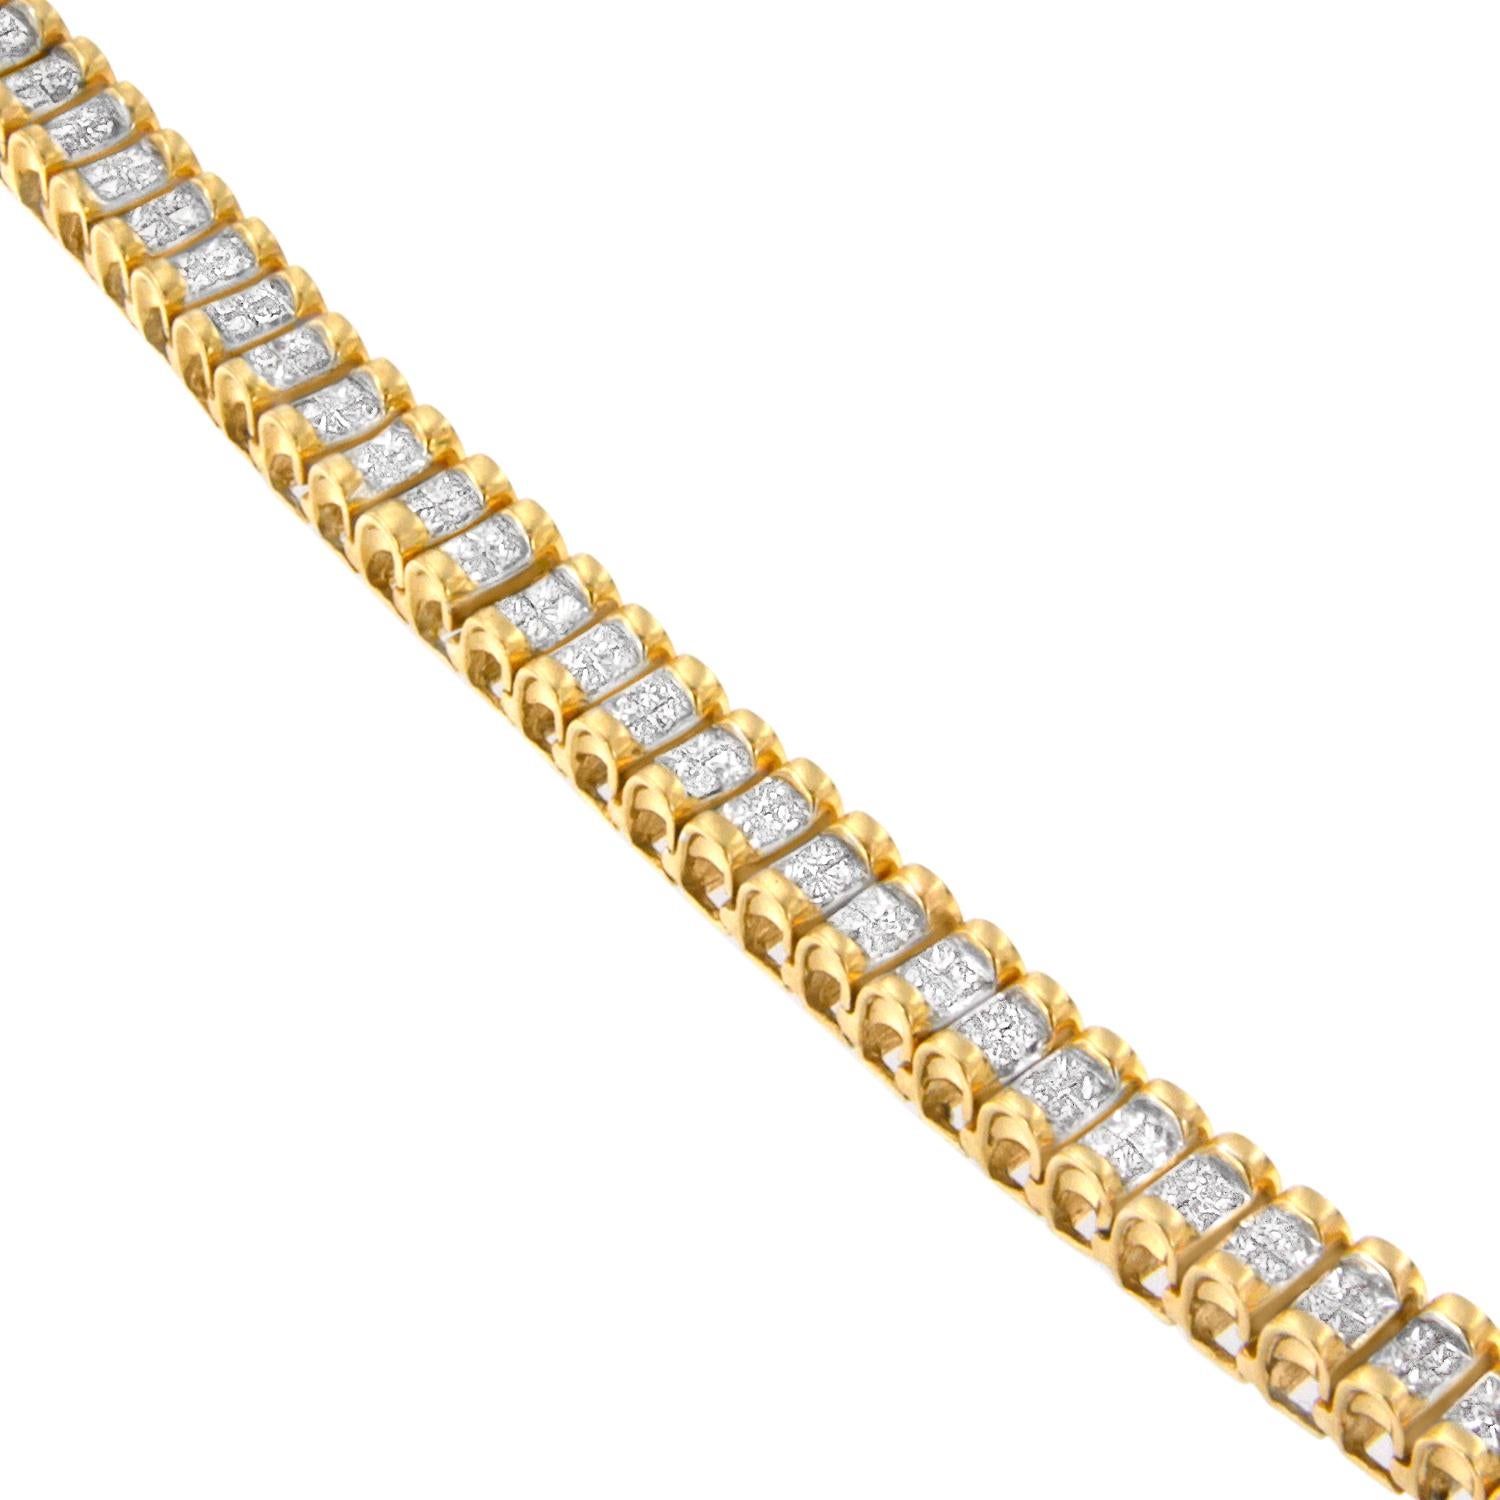 This classic diamond tennis bracelet sparkles with a double row of princess cut diamonds set within square repeating links. Crafted in 14 karat yellow gold, it has a stunning total diamond weight of 3 carats. Bracelet has 204 natural, princess